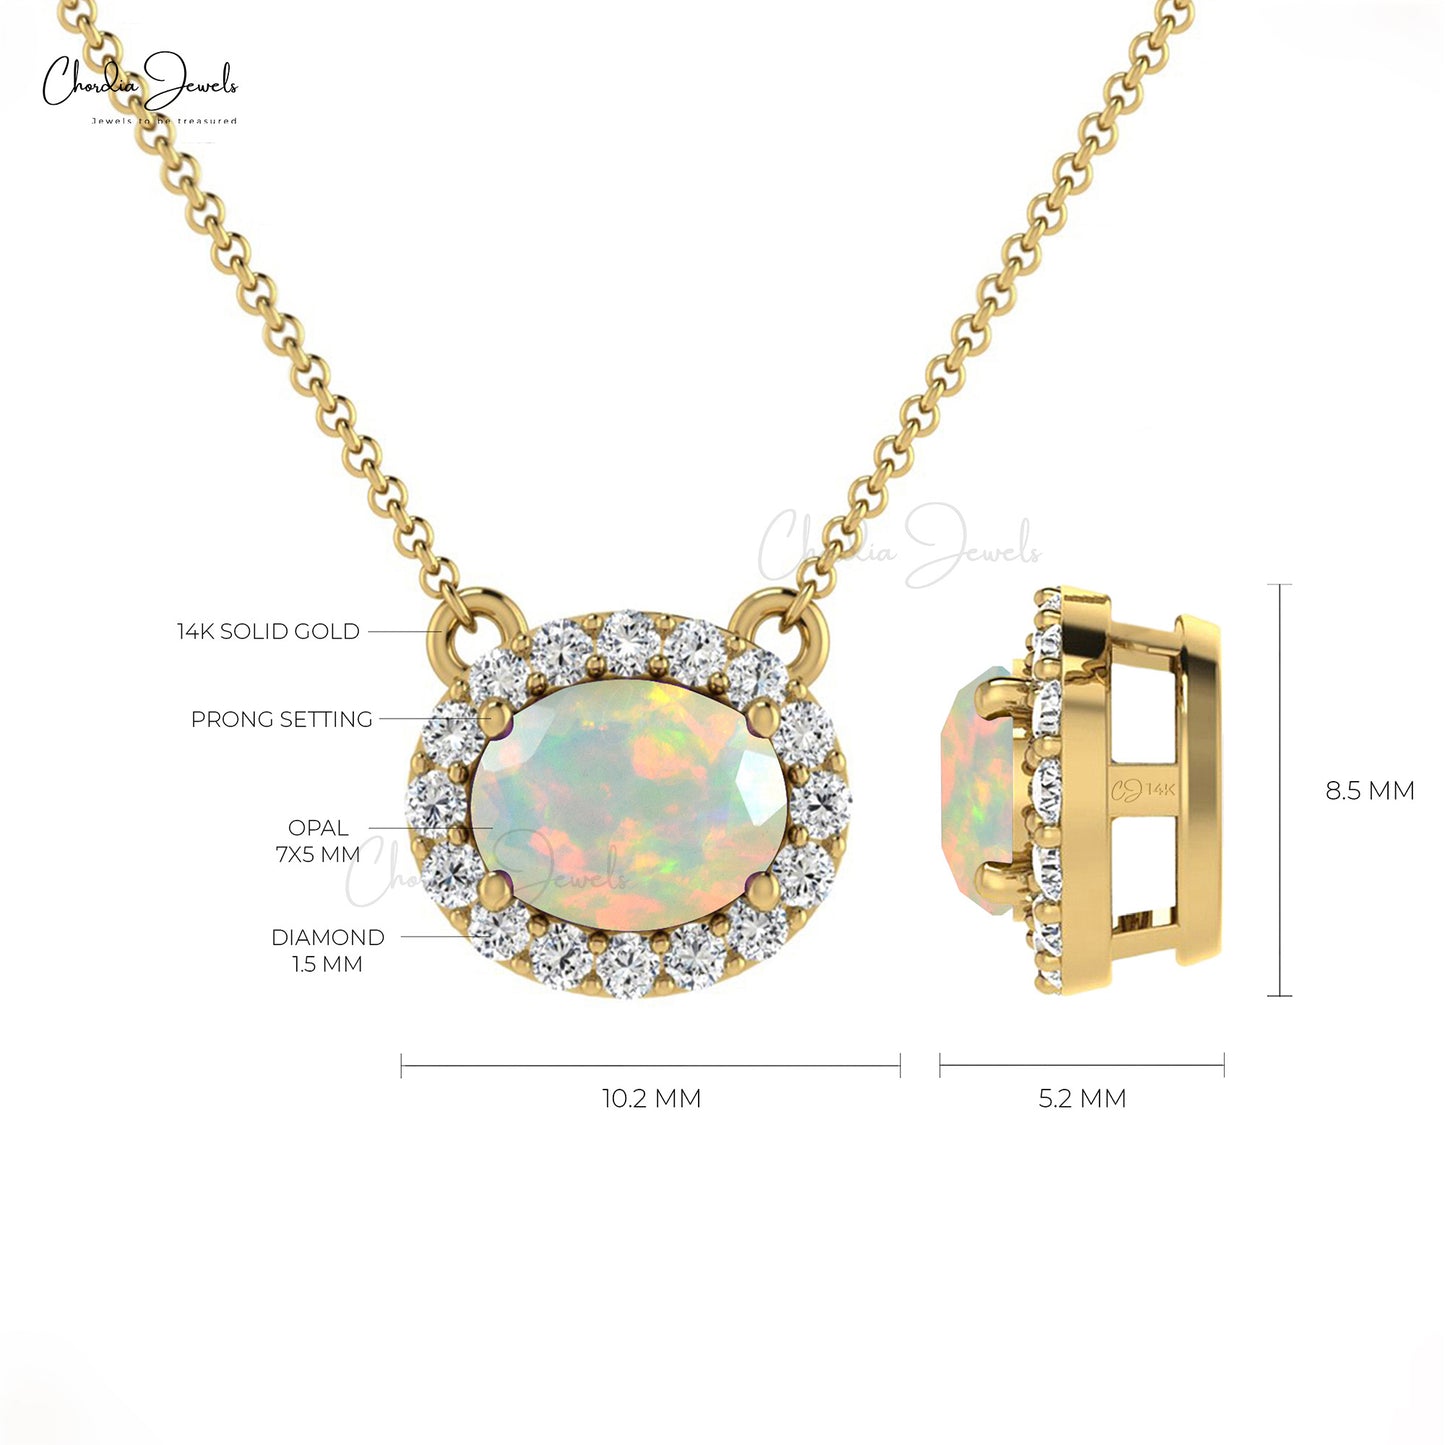 Vintage Style 7X5MM Opal and Diamond Halo Necklace